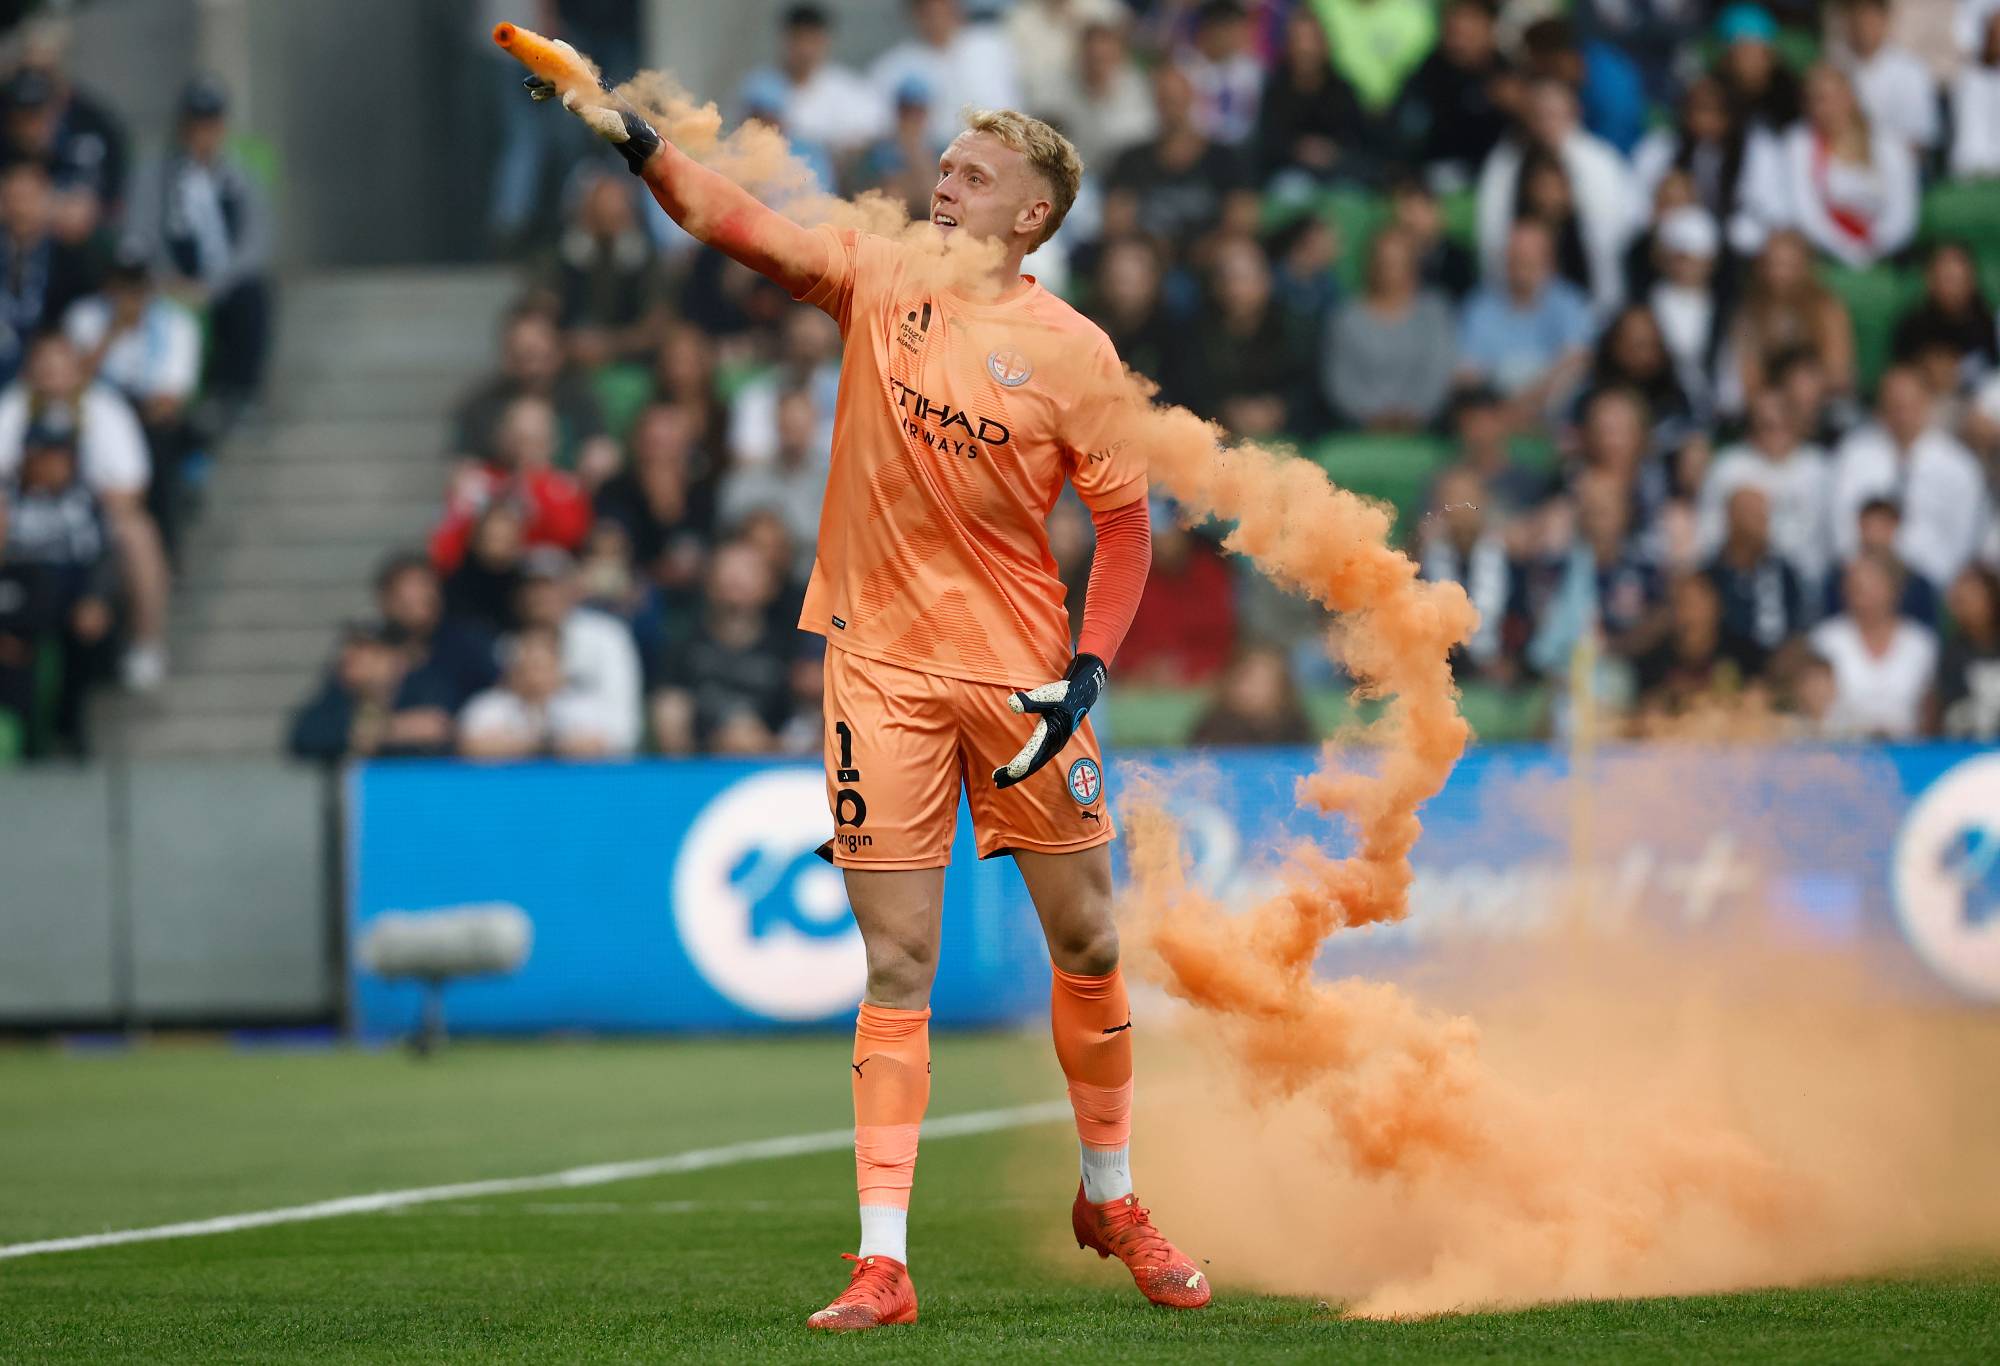 MELBOURNE, AUSTRALIA - DECEMBER 17: Tom Glover of Melbourne City picks up a flare to remove it from the pitch during the round eight A-League Men's match between Melbourne City and Melbourne Victory at AAMI Park, on December 17, 2022, in Melbourne, Australia. (Photo by Darrian Traynor/Getty Images)